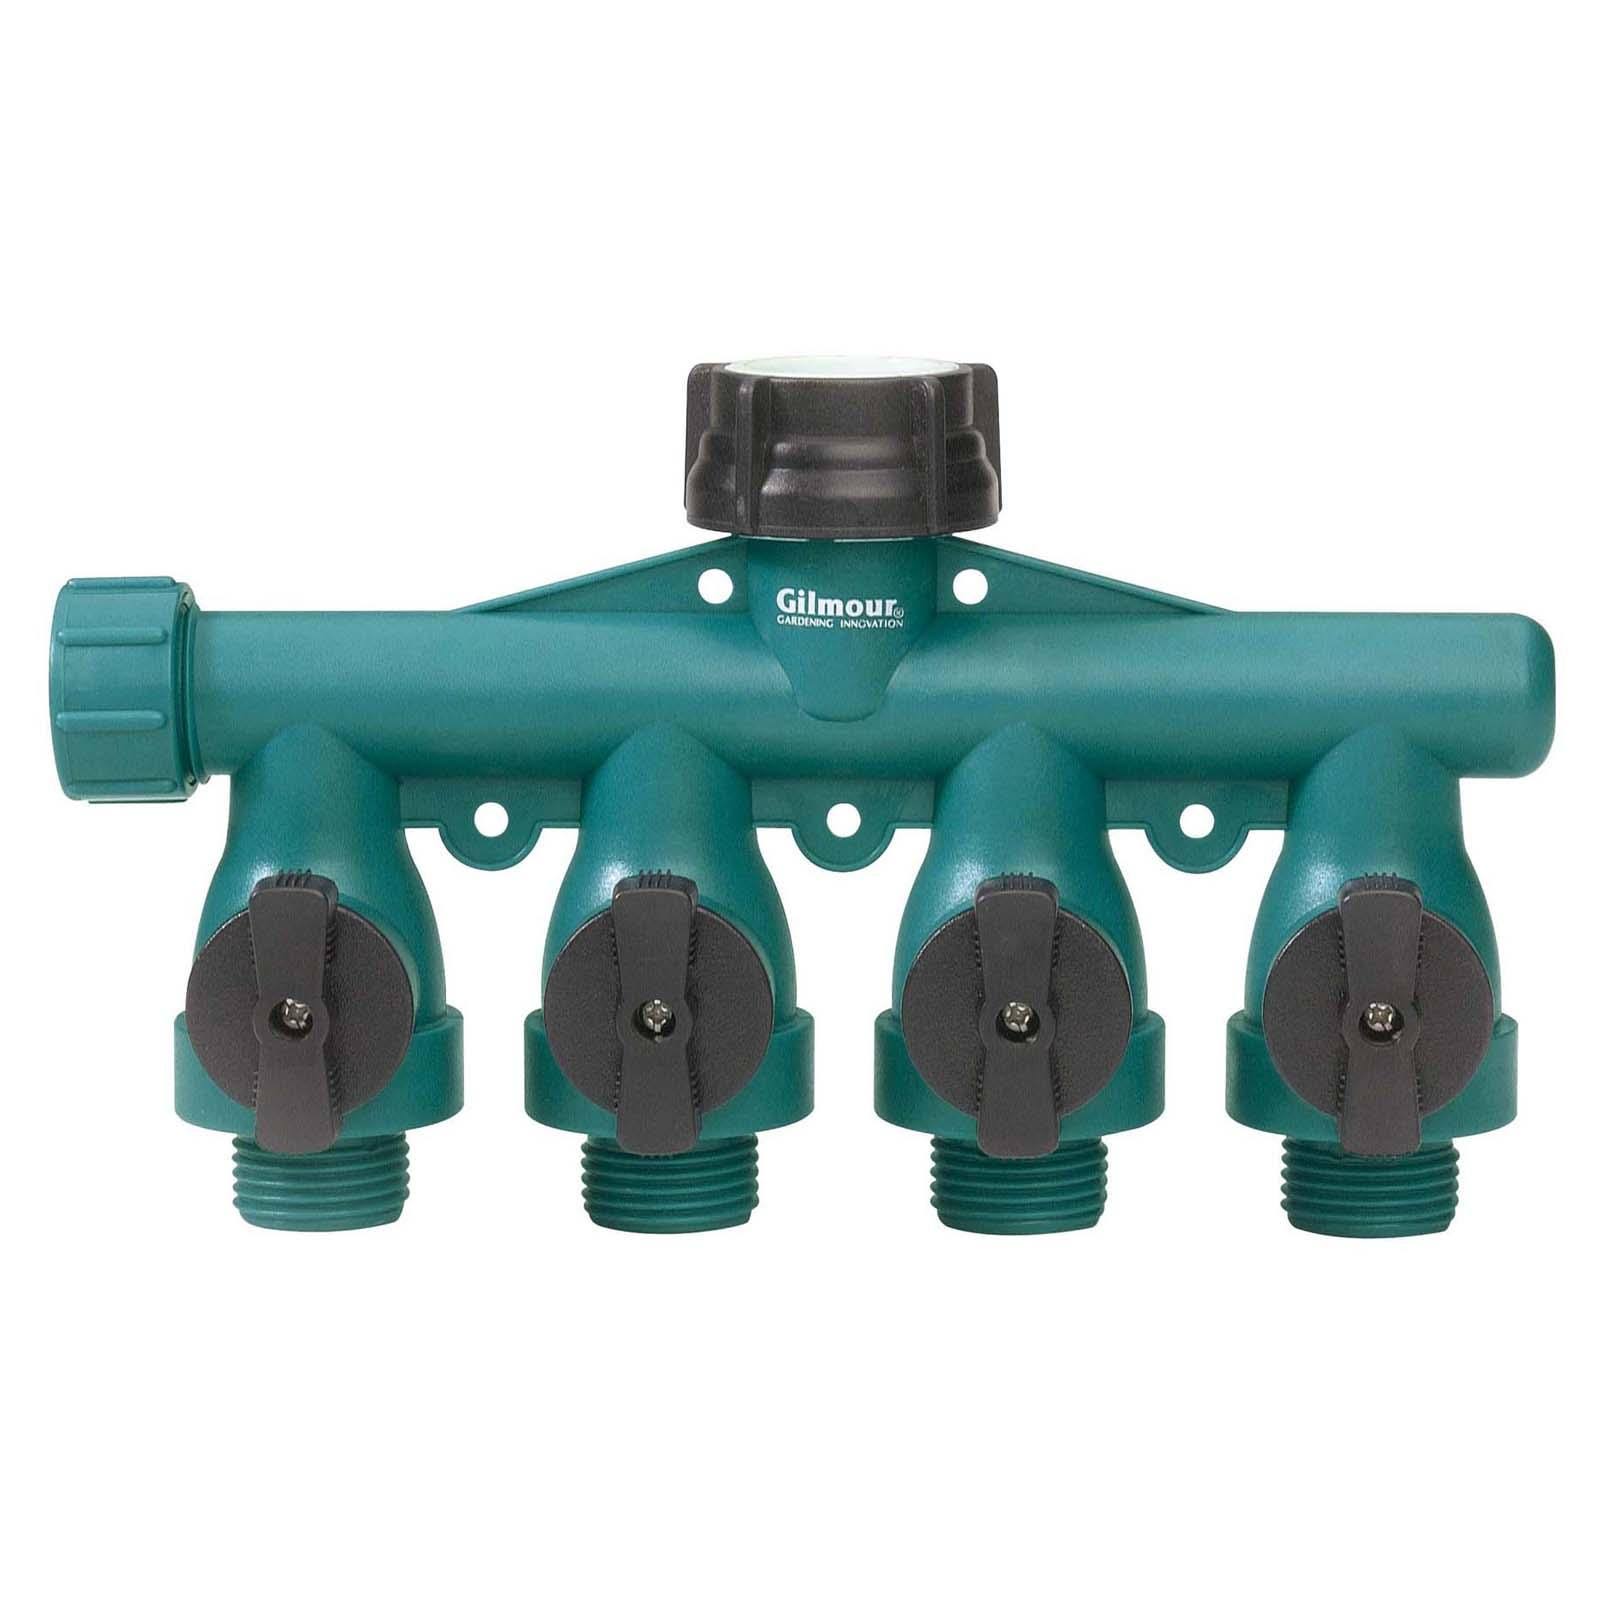 Gilmour Lawn Care Four Way Hose Connector - Teal